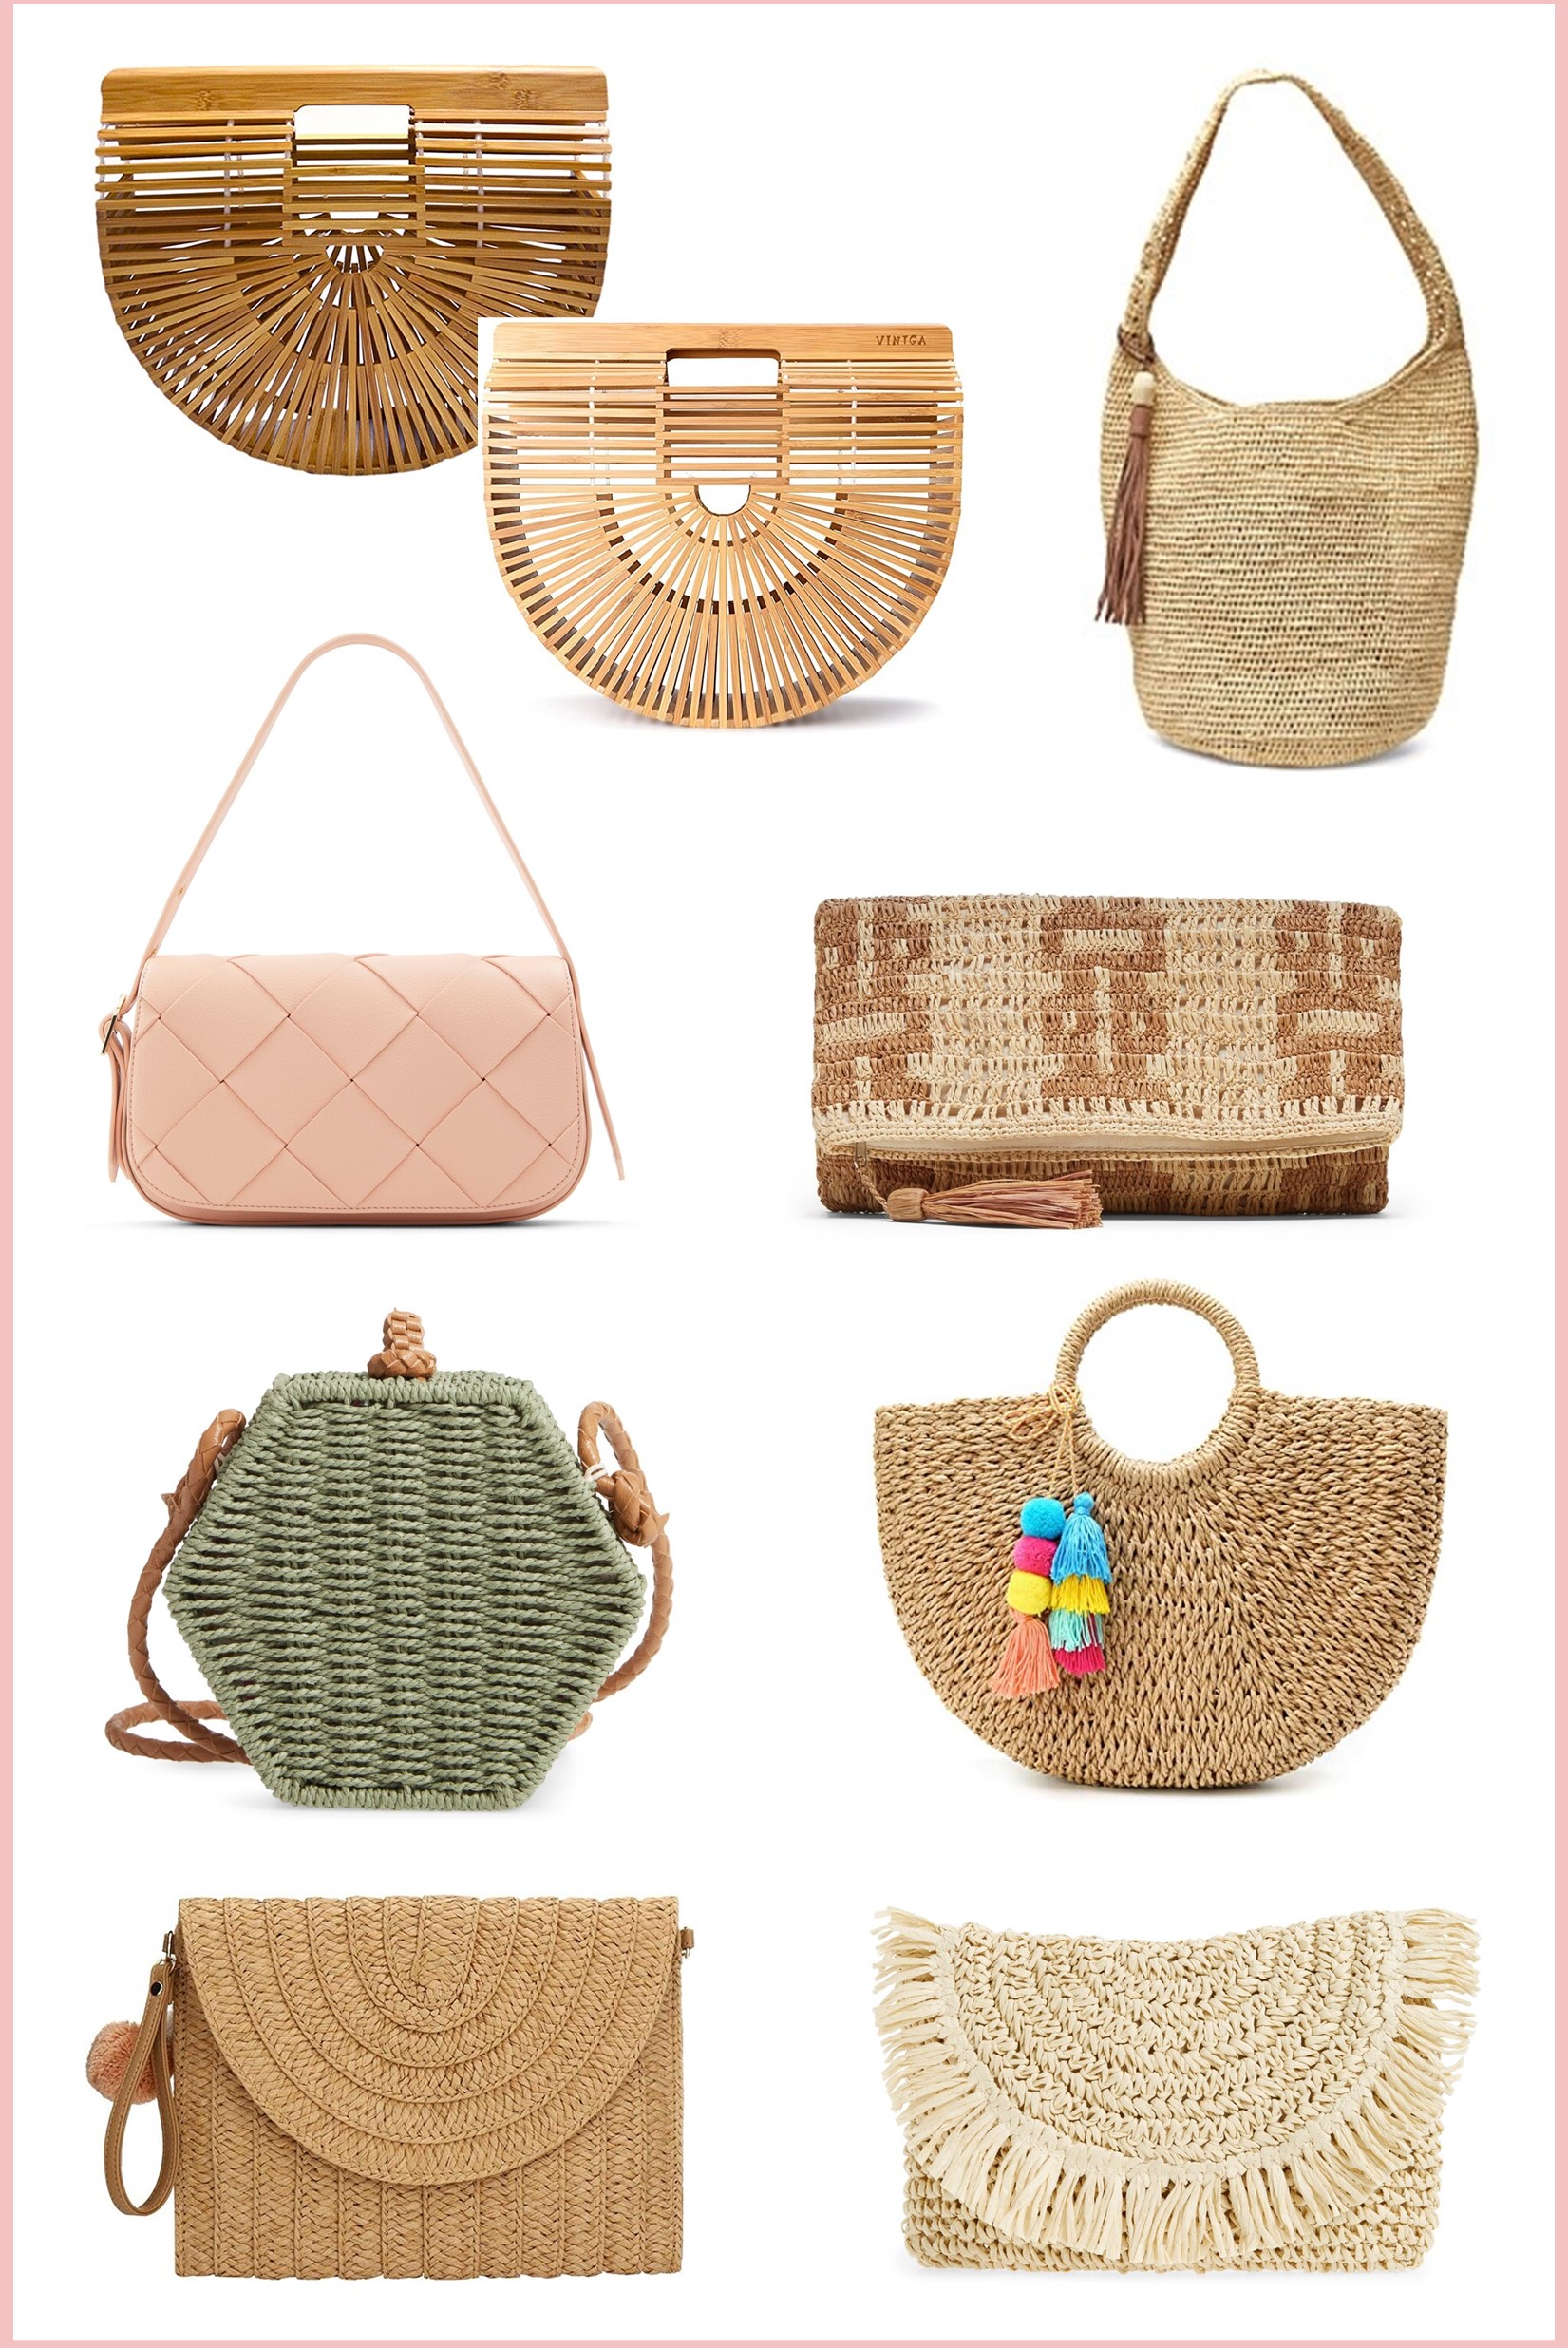 Bamboo Bags at Best Price in Guwahati | Indrani Collection